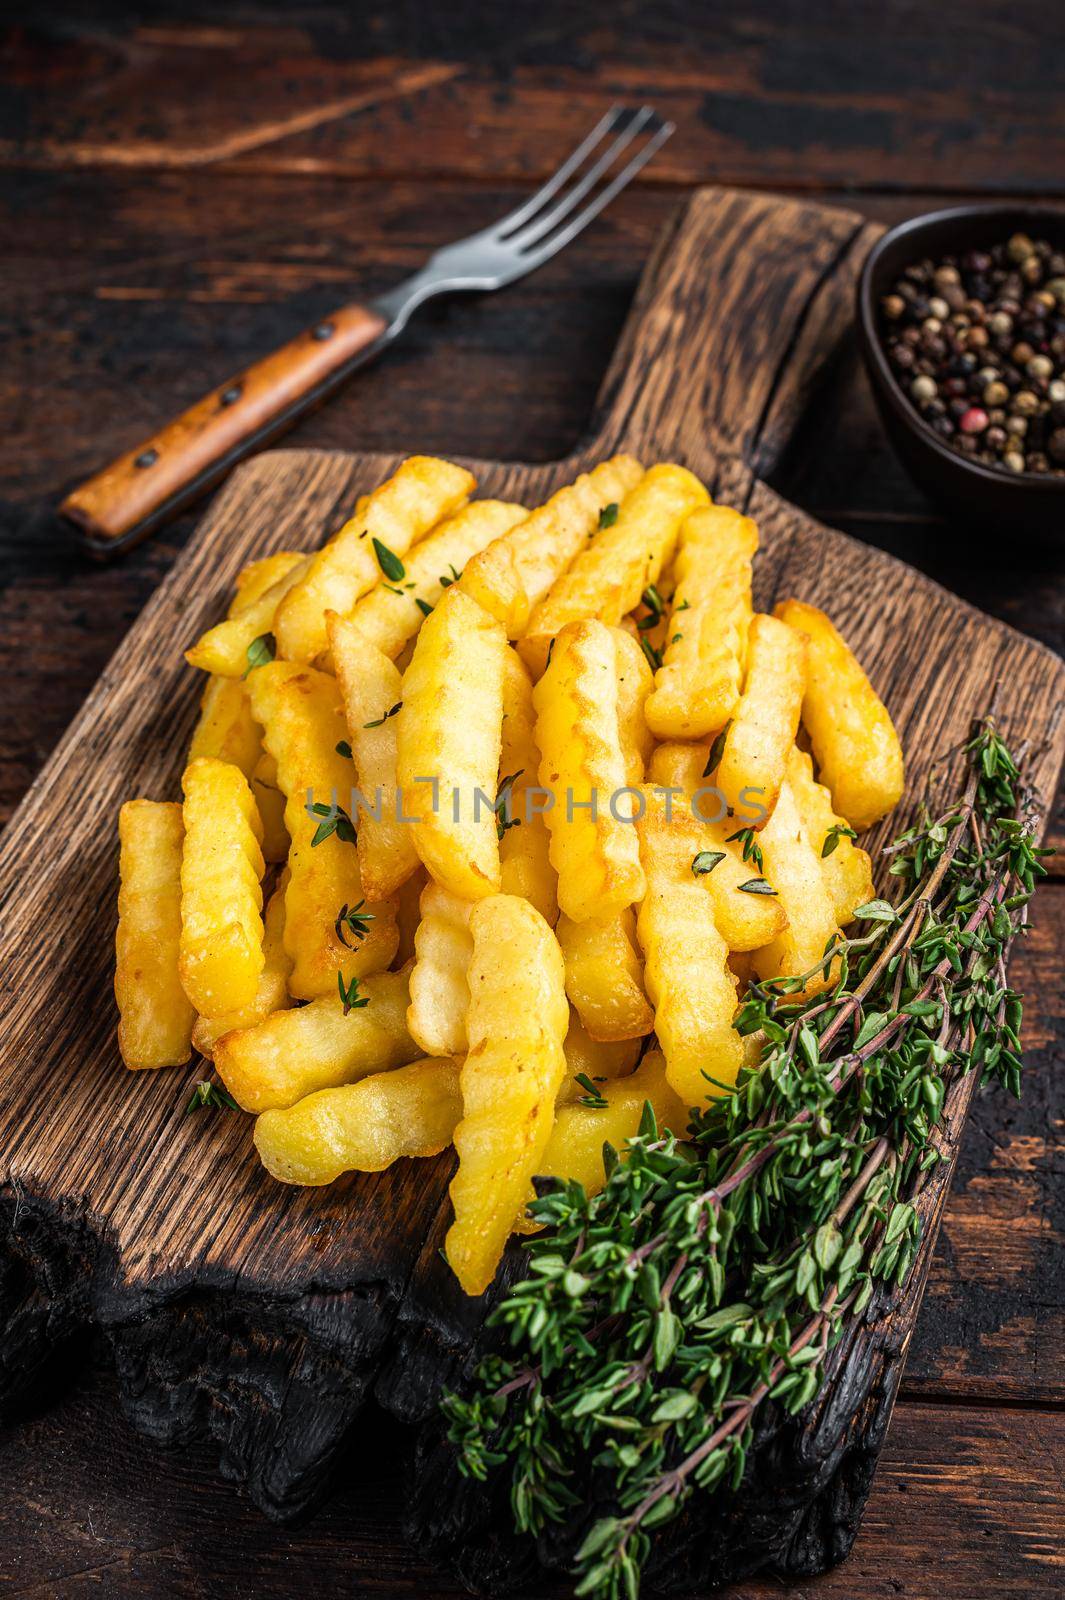 Baked Crinkle French fries potatoes sticks or chips on a wooden board. Dark wooden background. Top view by Composter